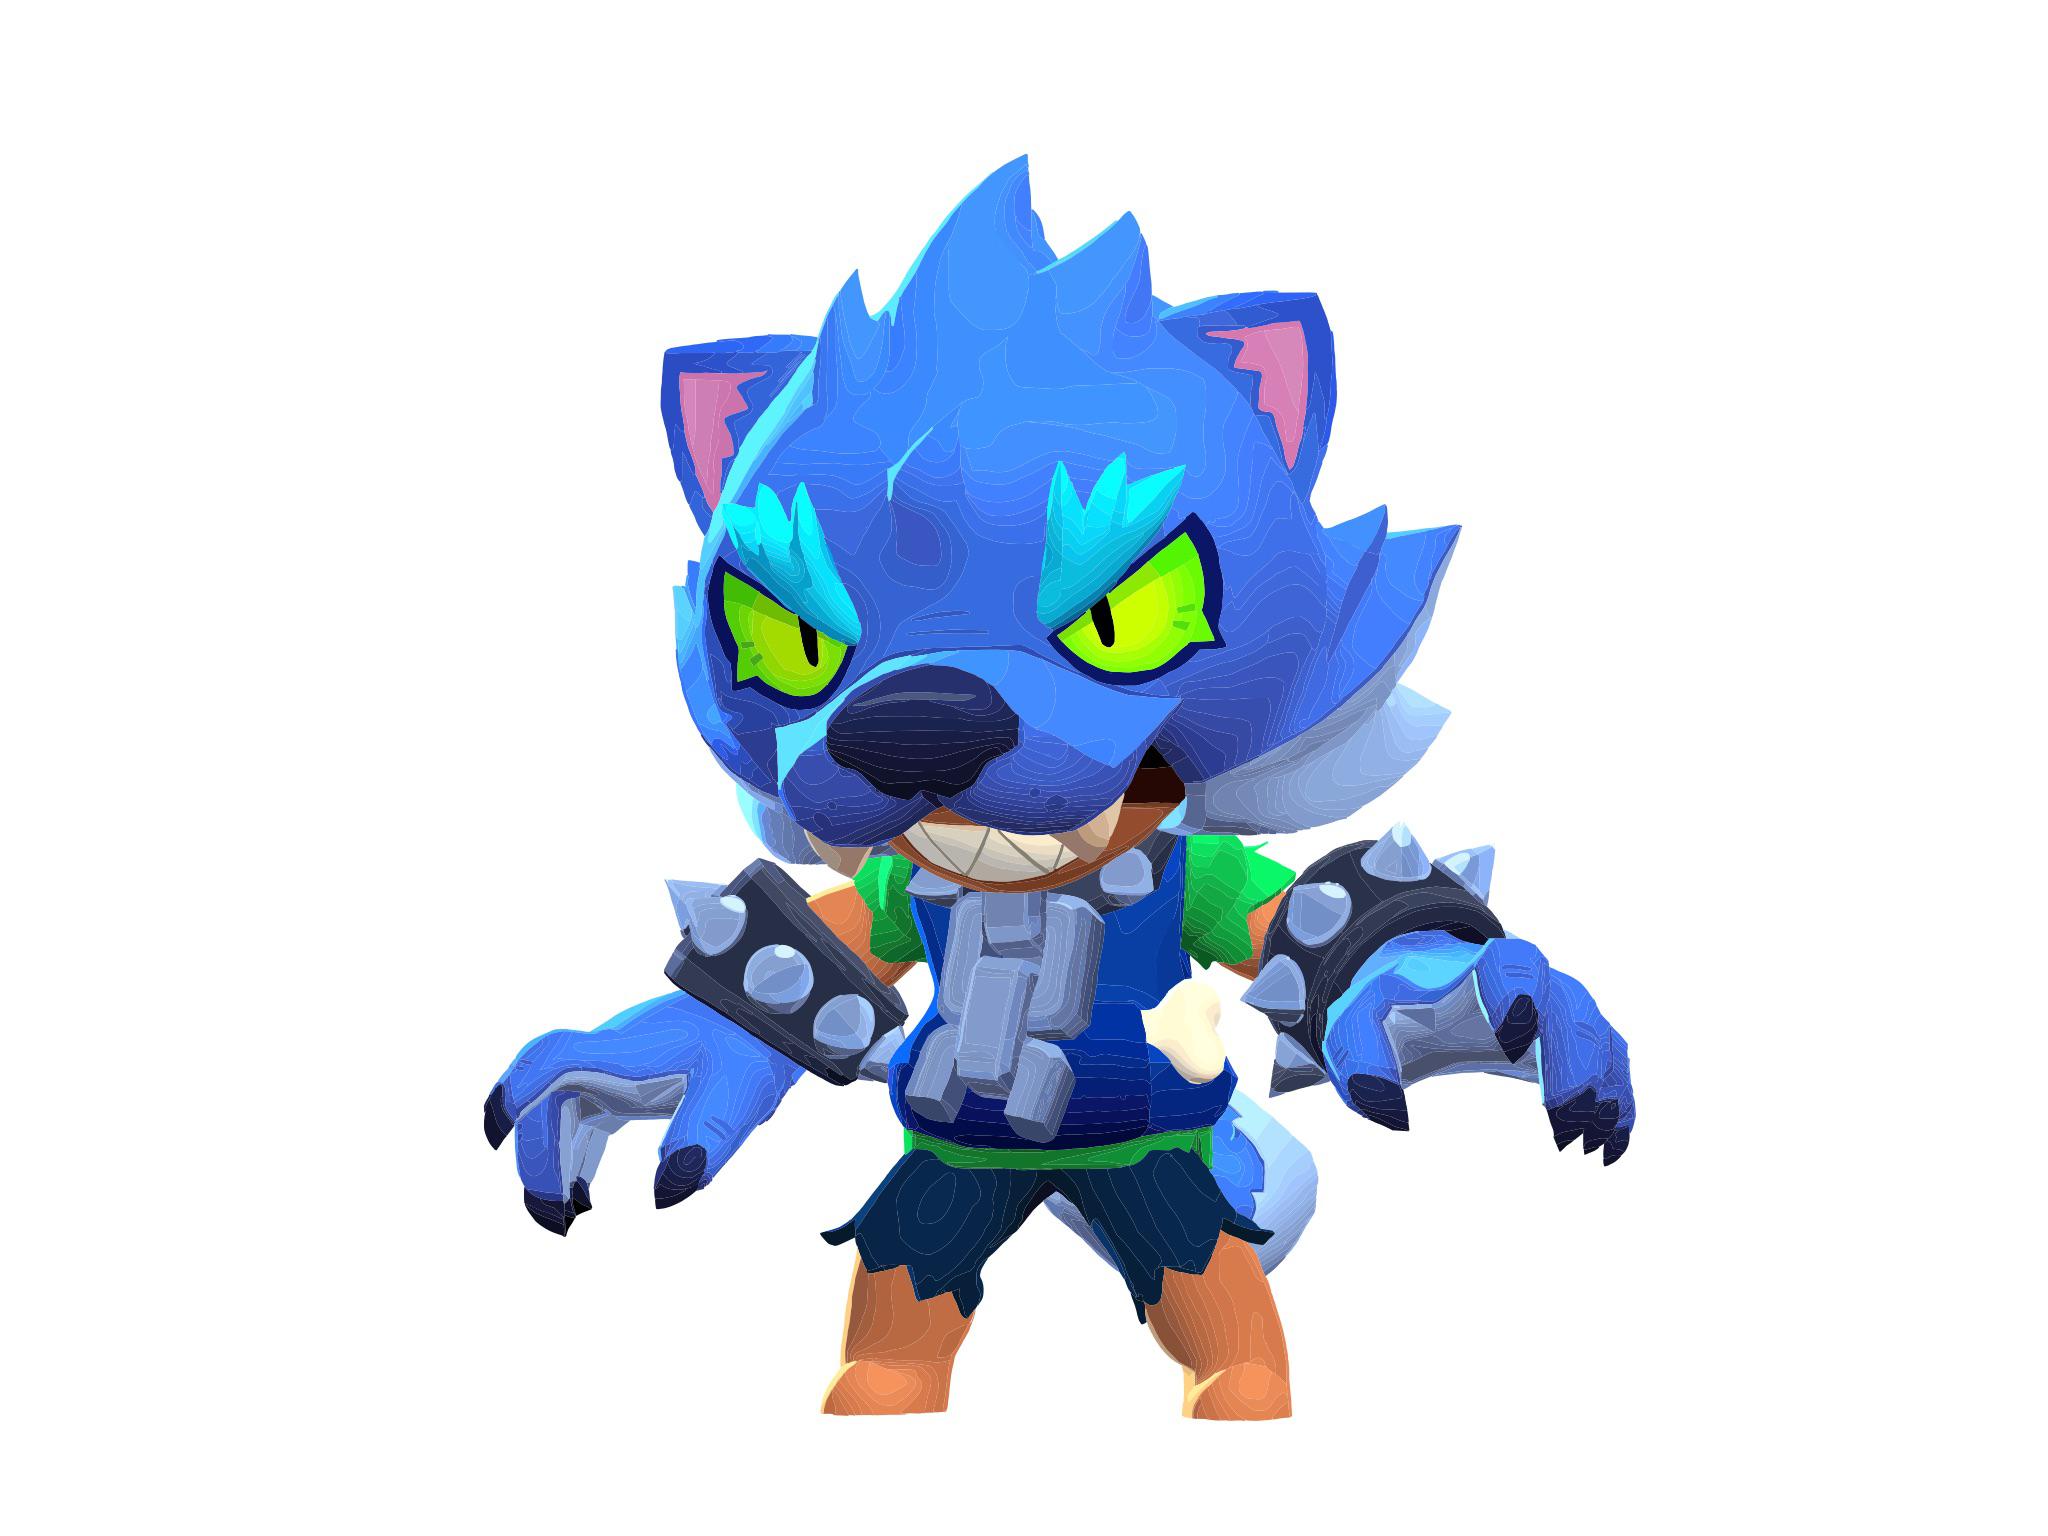 Here's a drawing of werewolf Leon for those who are waiting for him to appear in shop!